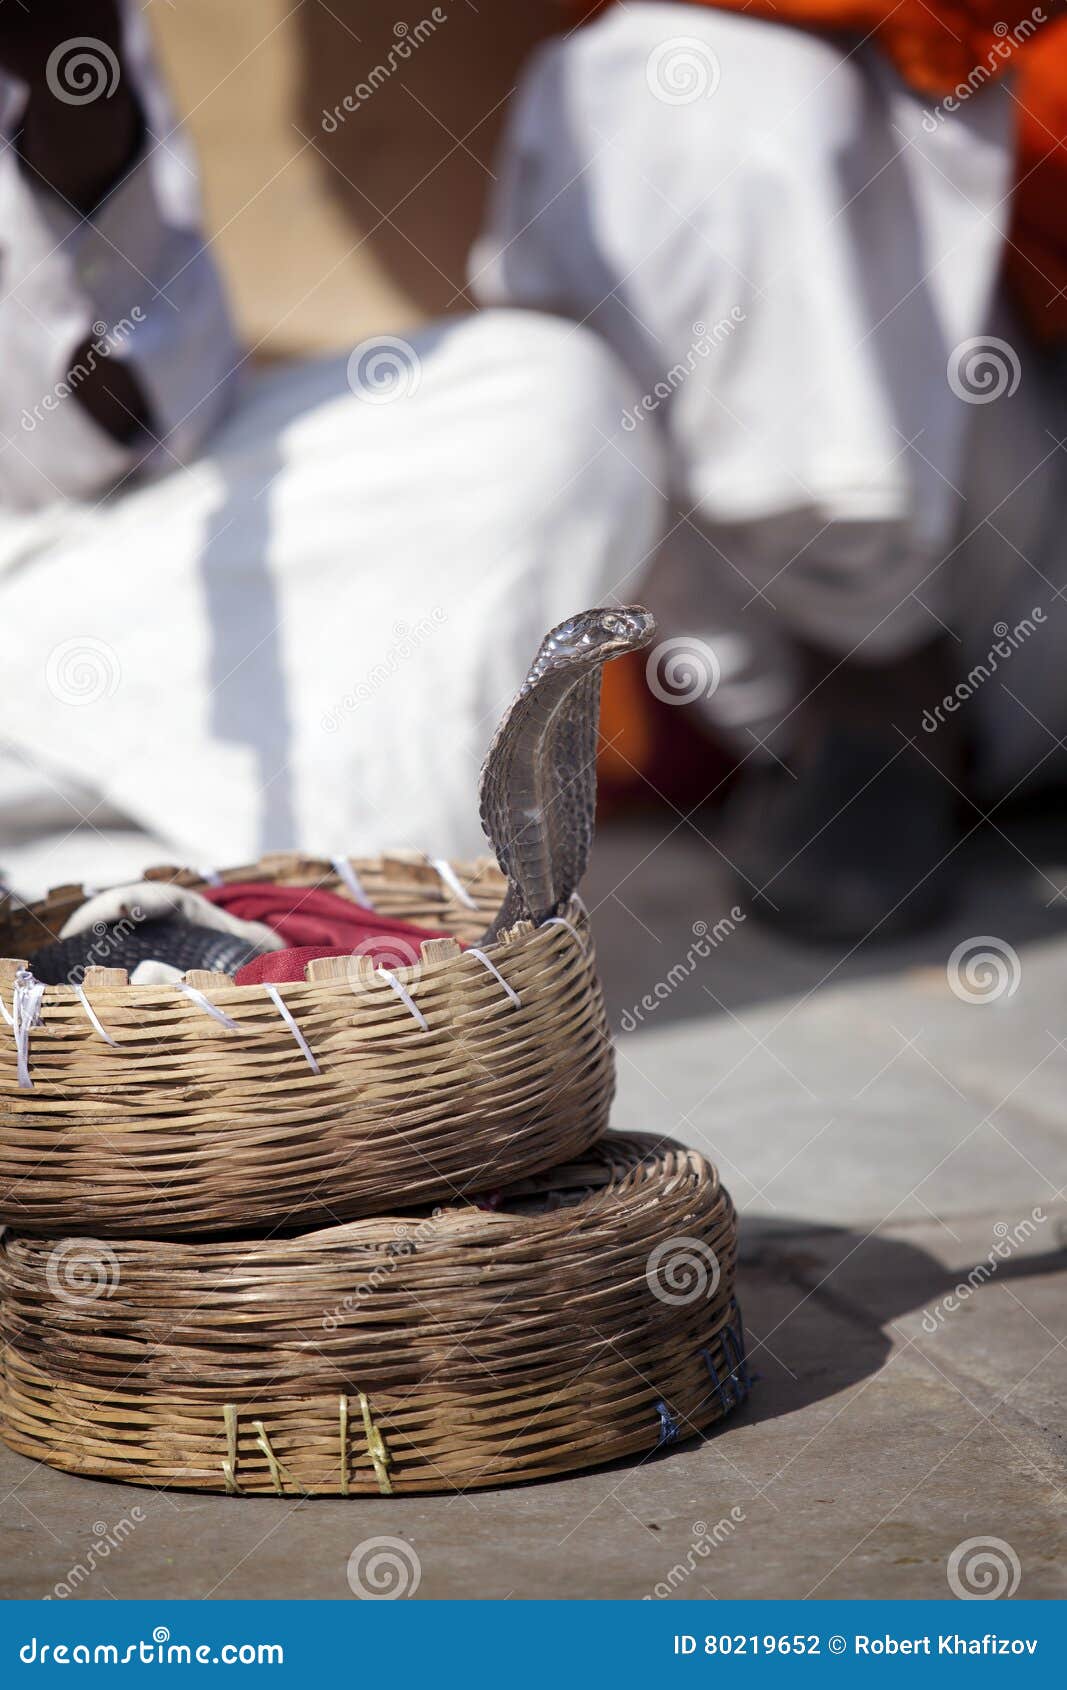 indian cobra looking out of the basket fakir